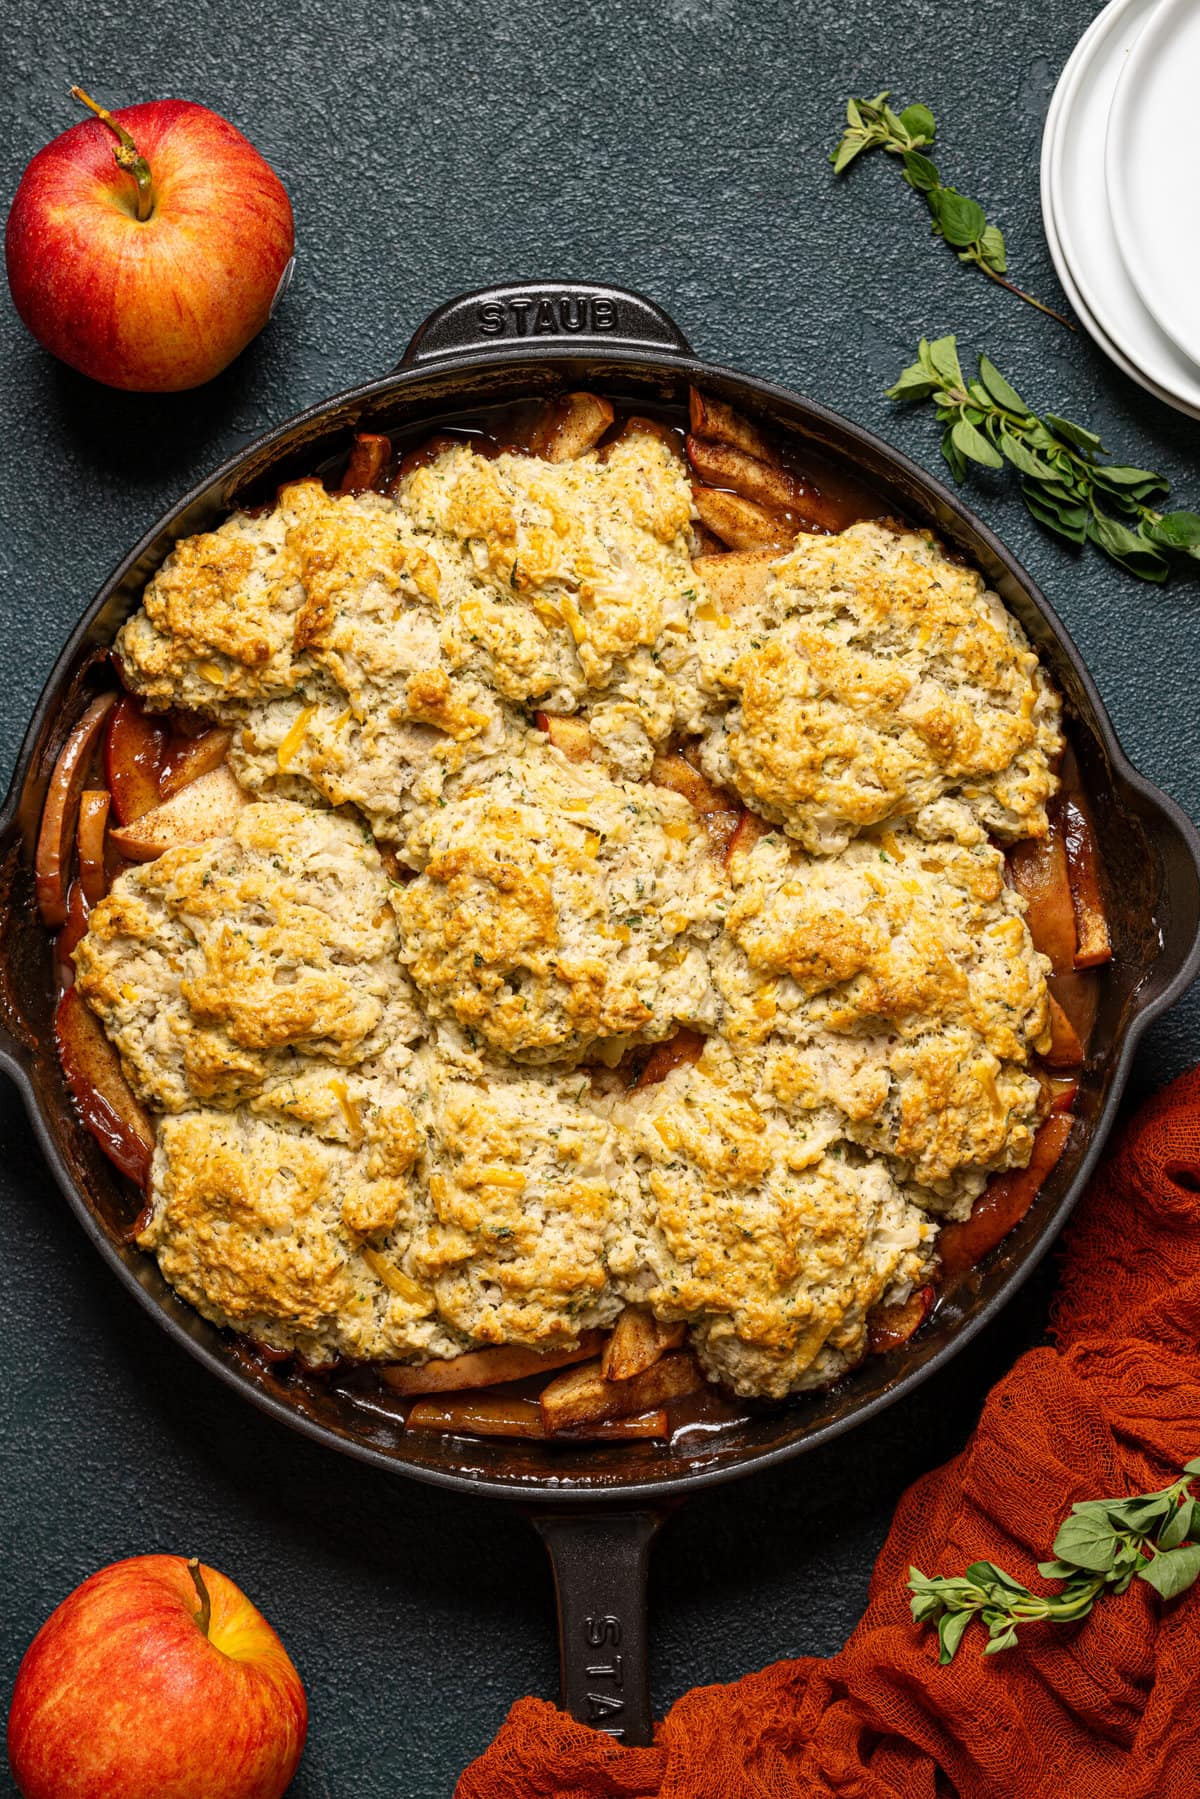 Baked cobbler in a skillet with two apples.